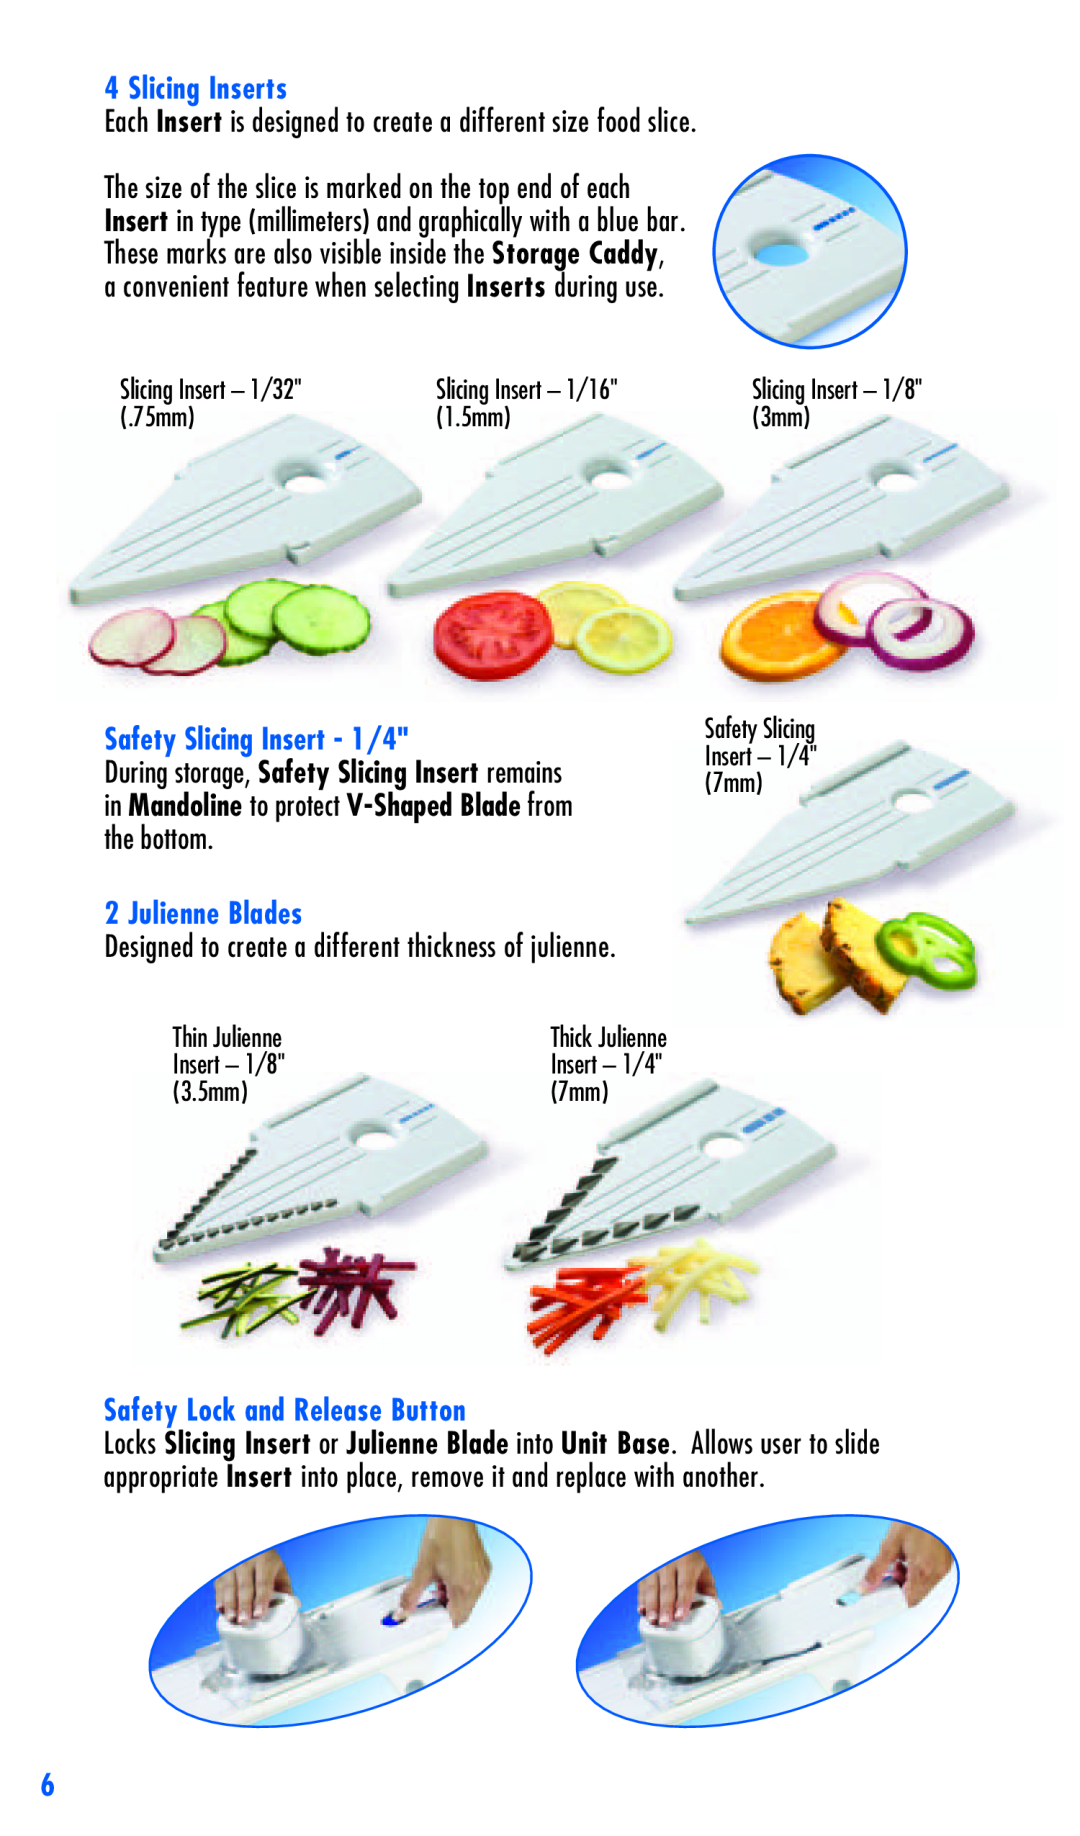 Zyliss safety rail-guided slicer easyslice mandolineTM Slicing Inserts, Safety Slicing Insert - 1/4, Julienne Blades, 75mm 